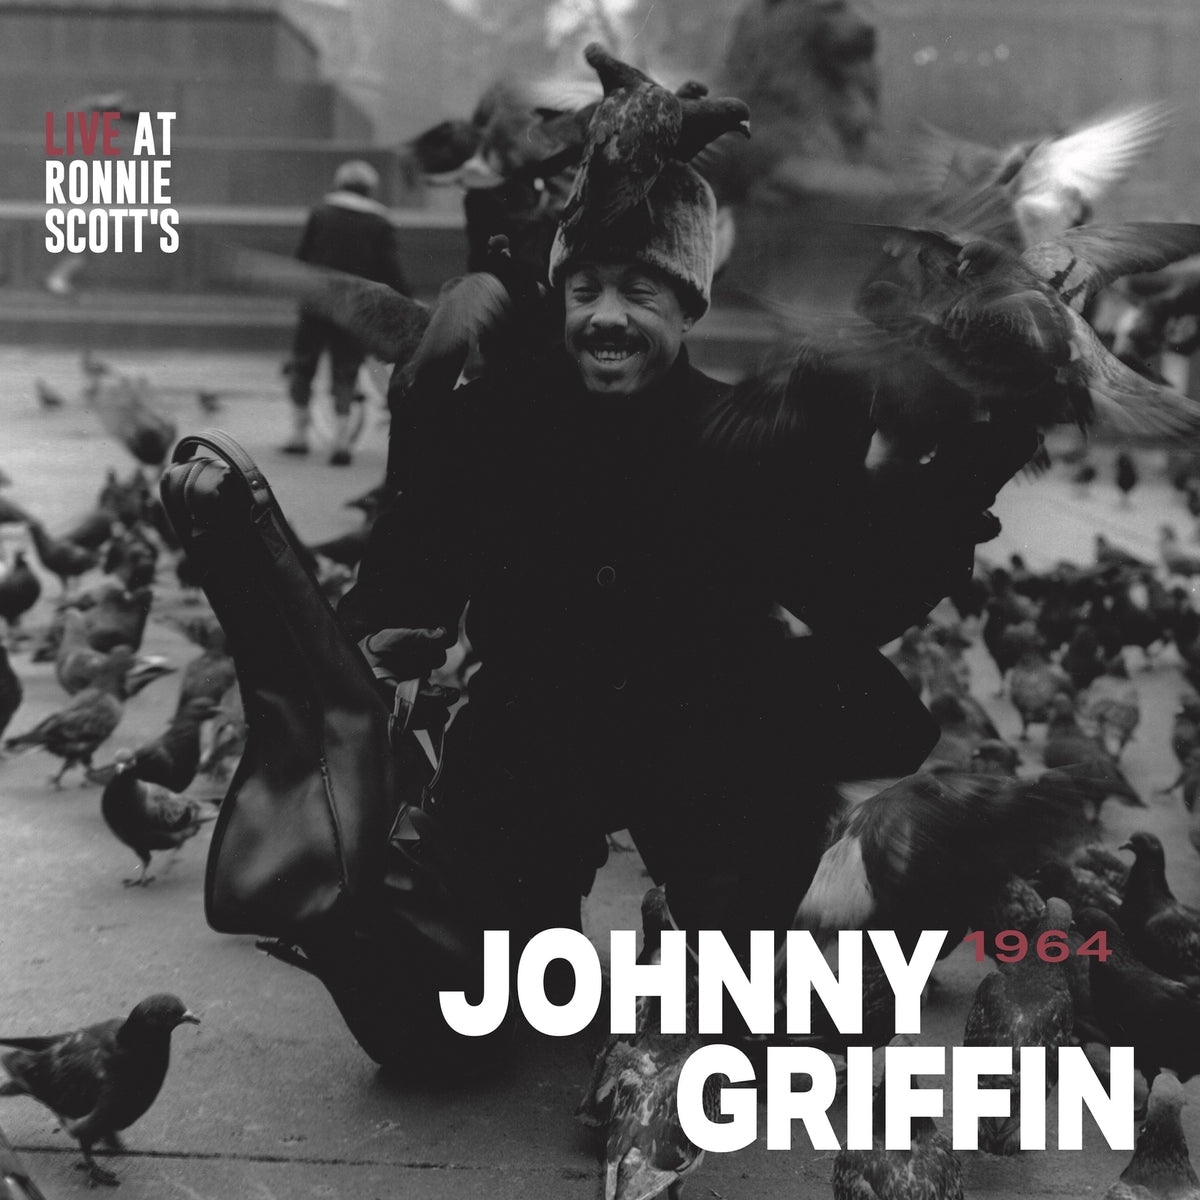 Johnny Griffin - Live at Ronnie Scott's, 1964 - RSGB1010